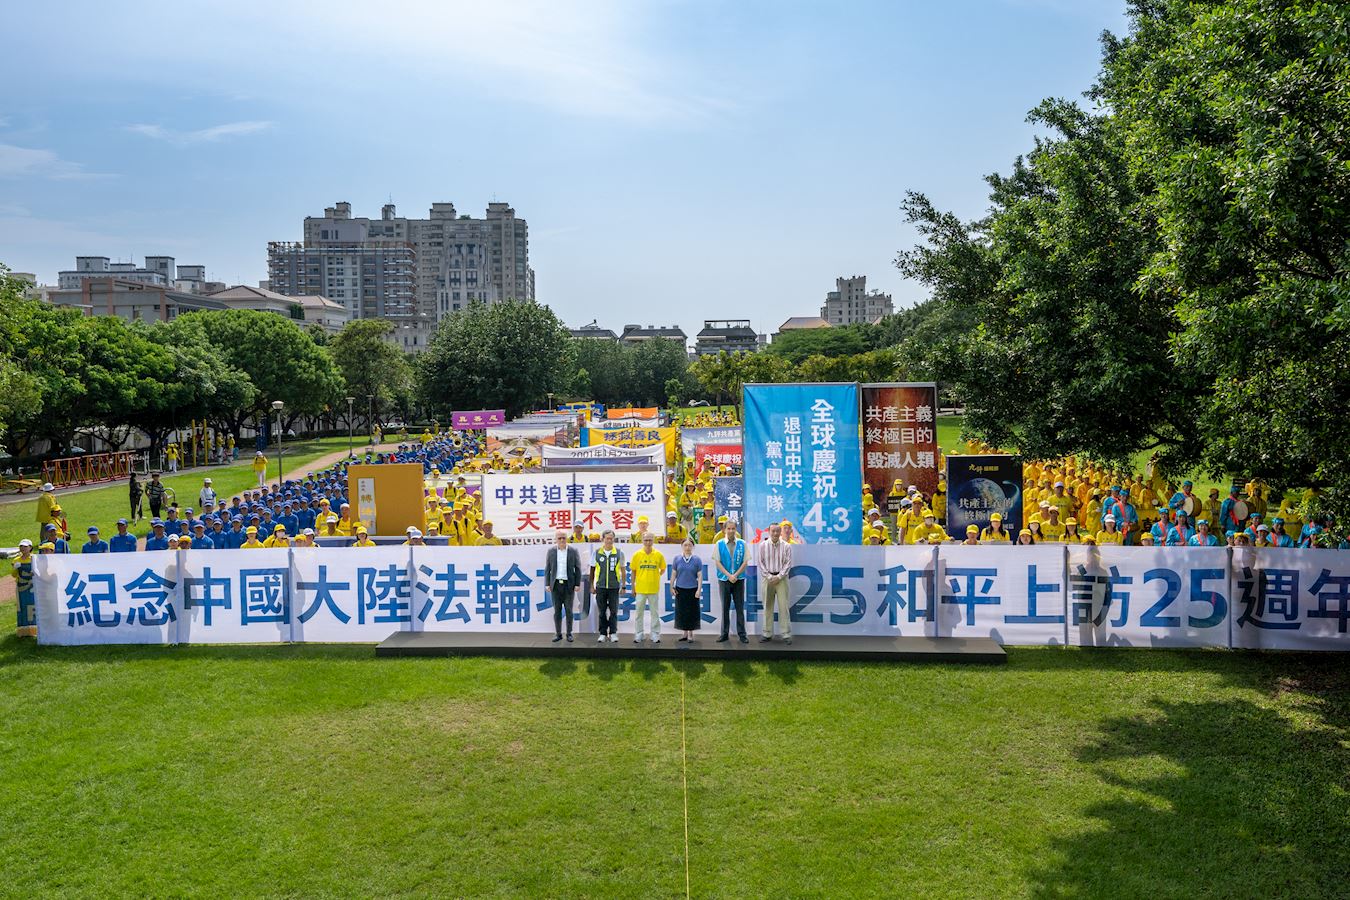 Image for article Taichung, Taiwan: Dignitaries Praise Falun Gong During Events to Commemorate Peaceful Appeal 25 Years Ago